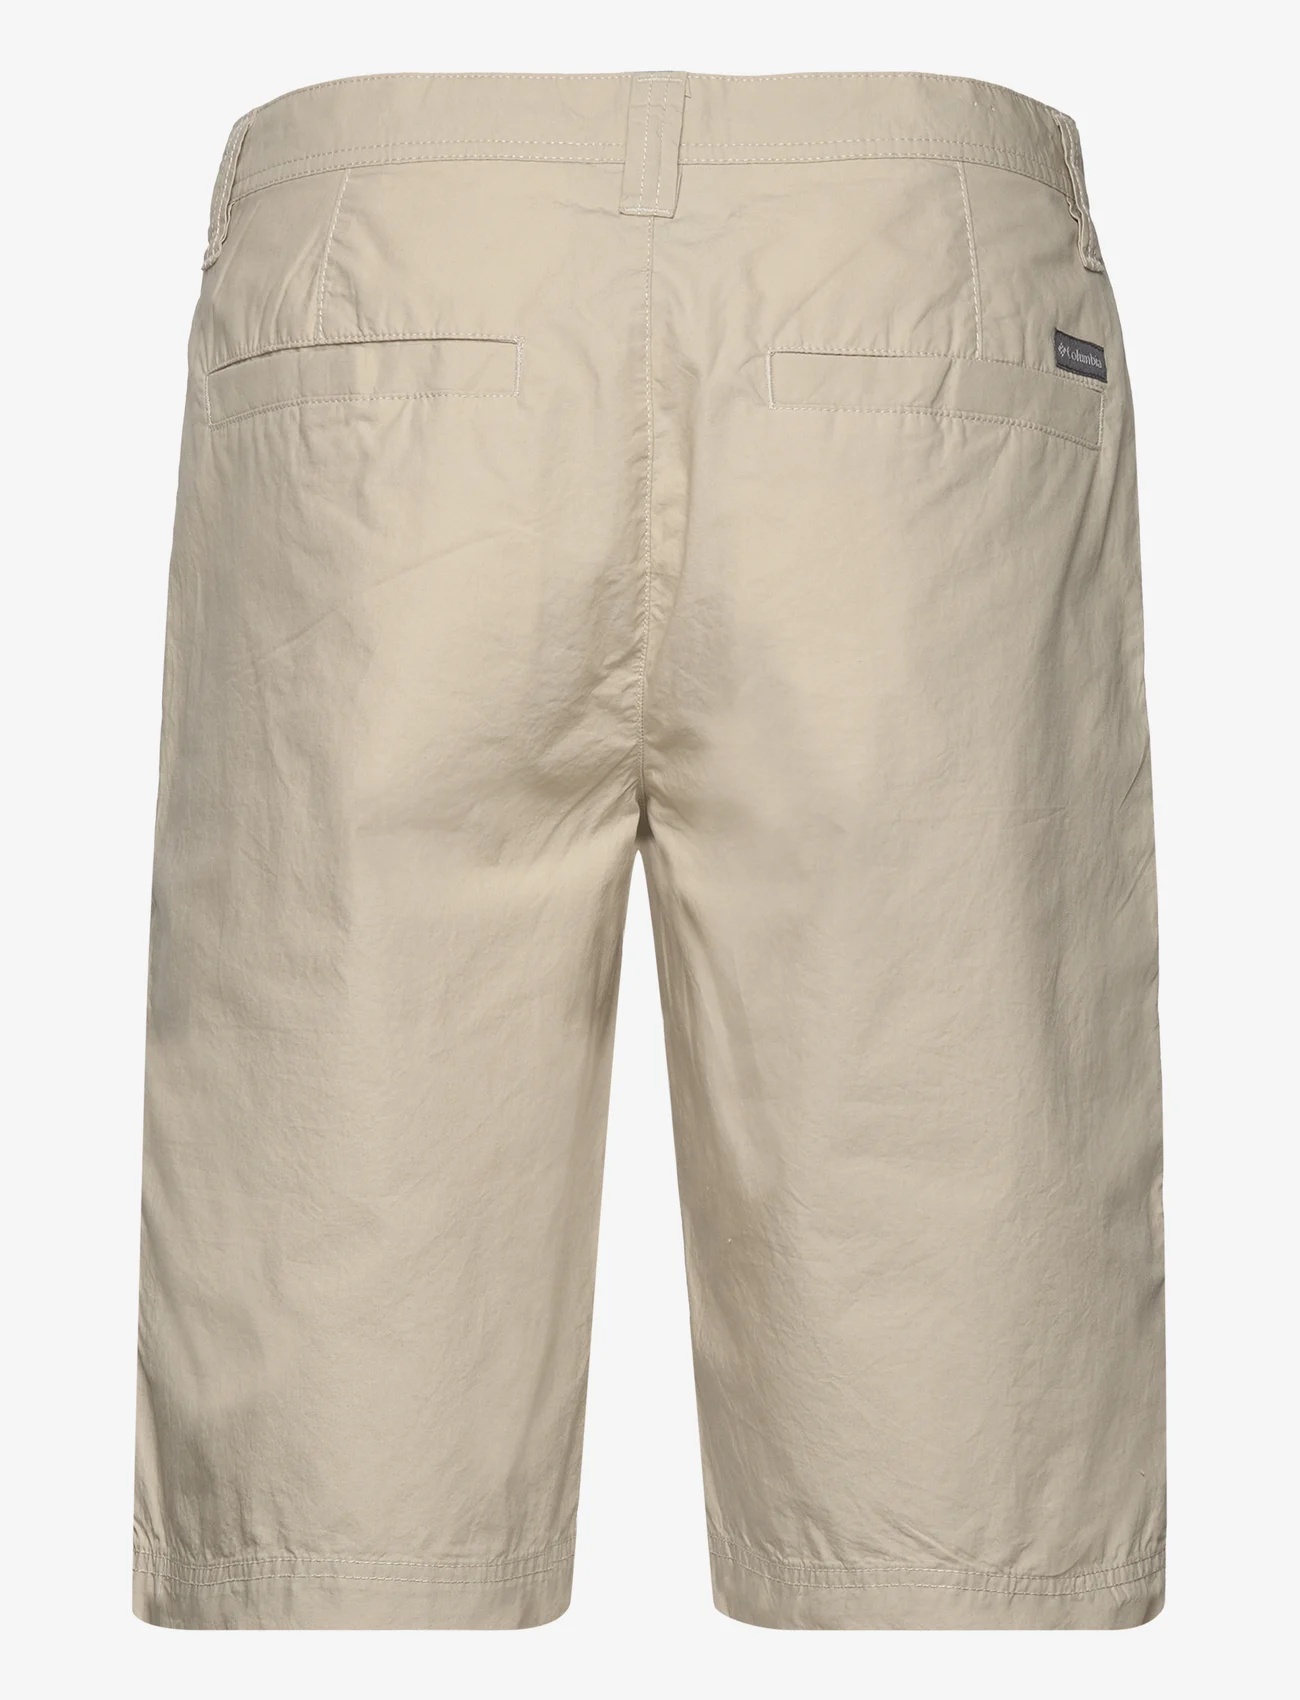 Columbia Sportswear - Washed Out Short - outdoorshorts - fossil - 1